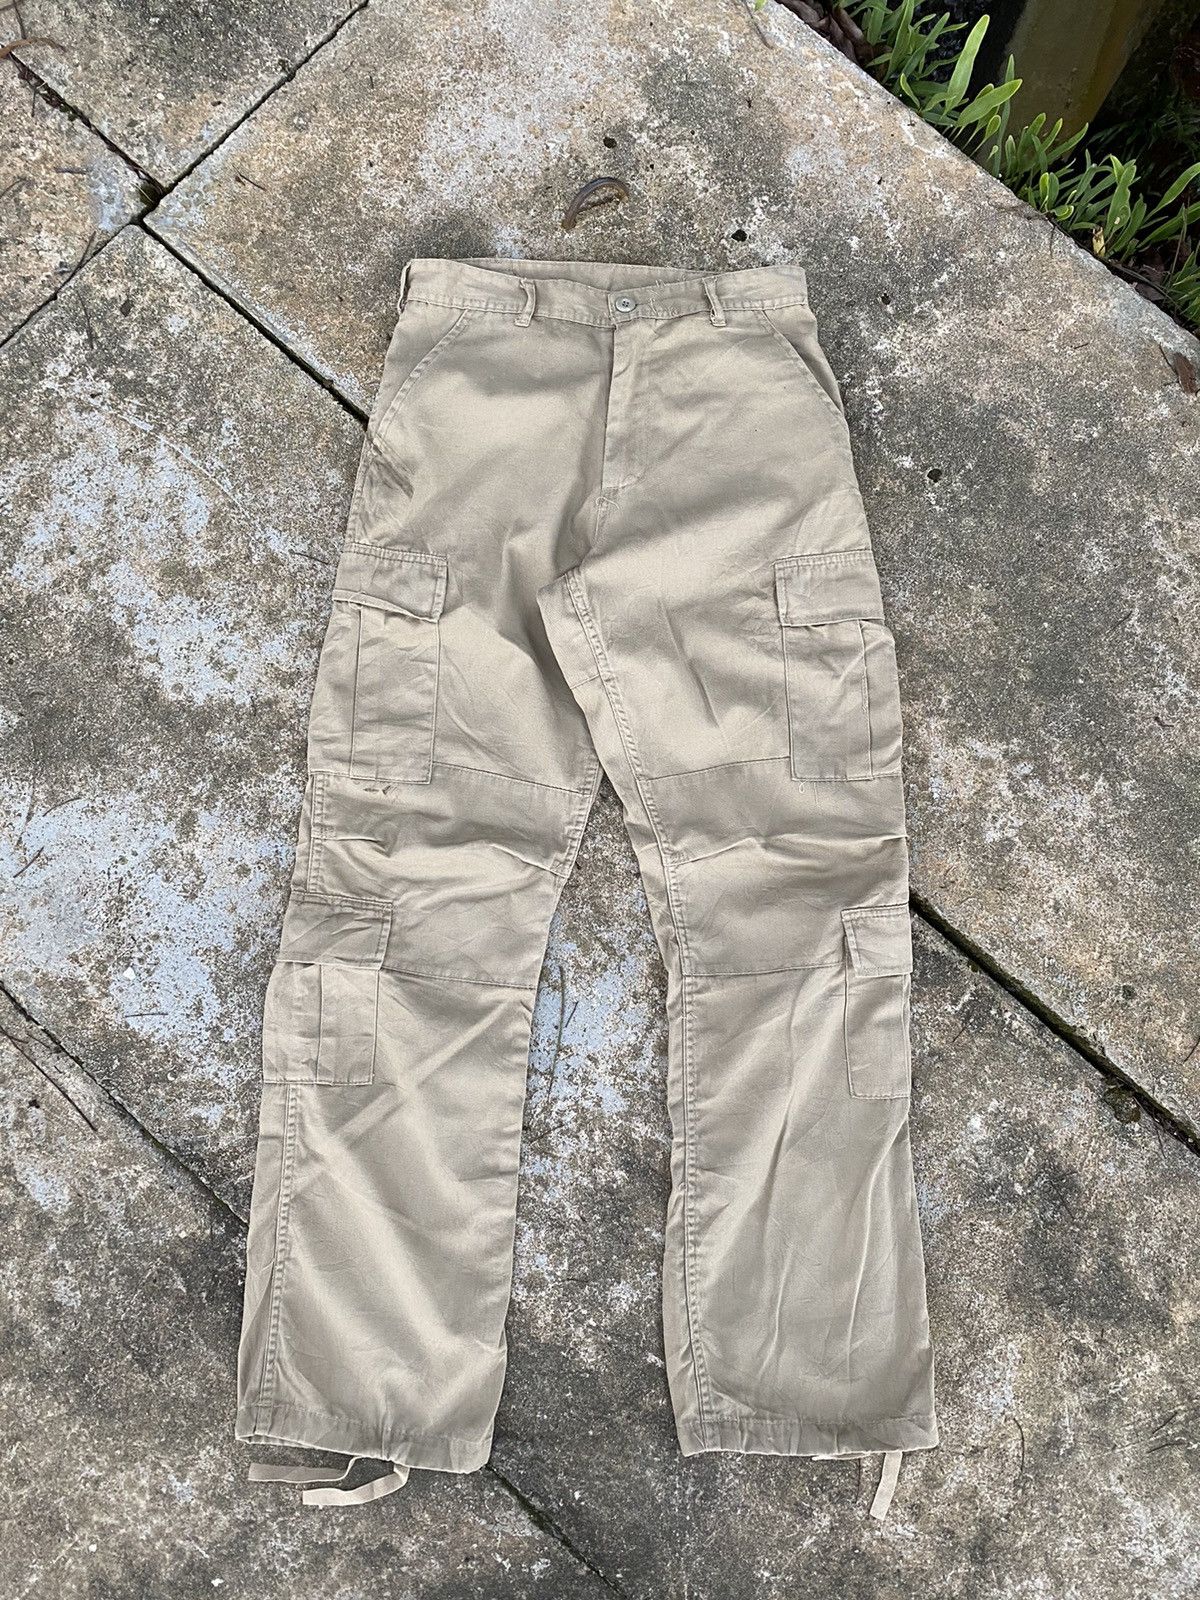 Military 🔥 Steals 🔥 ROTHCO BDU Tactical 8 pocket cargo pants | Grailed